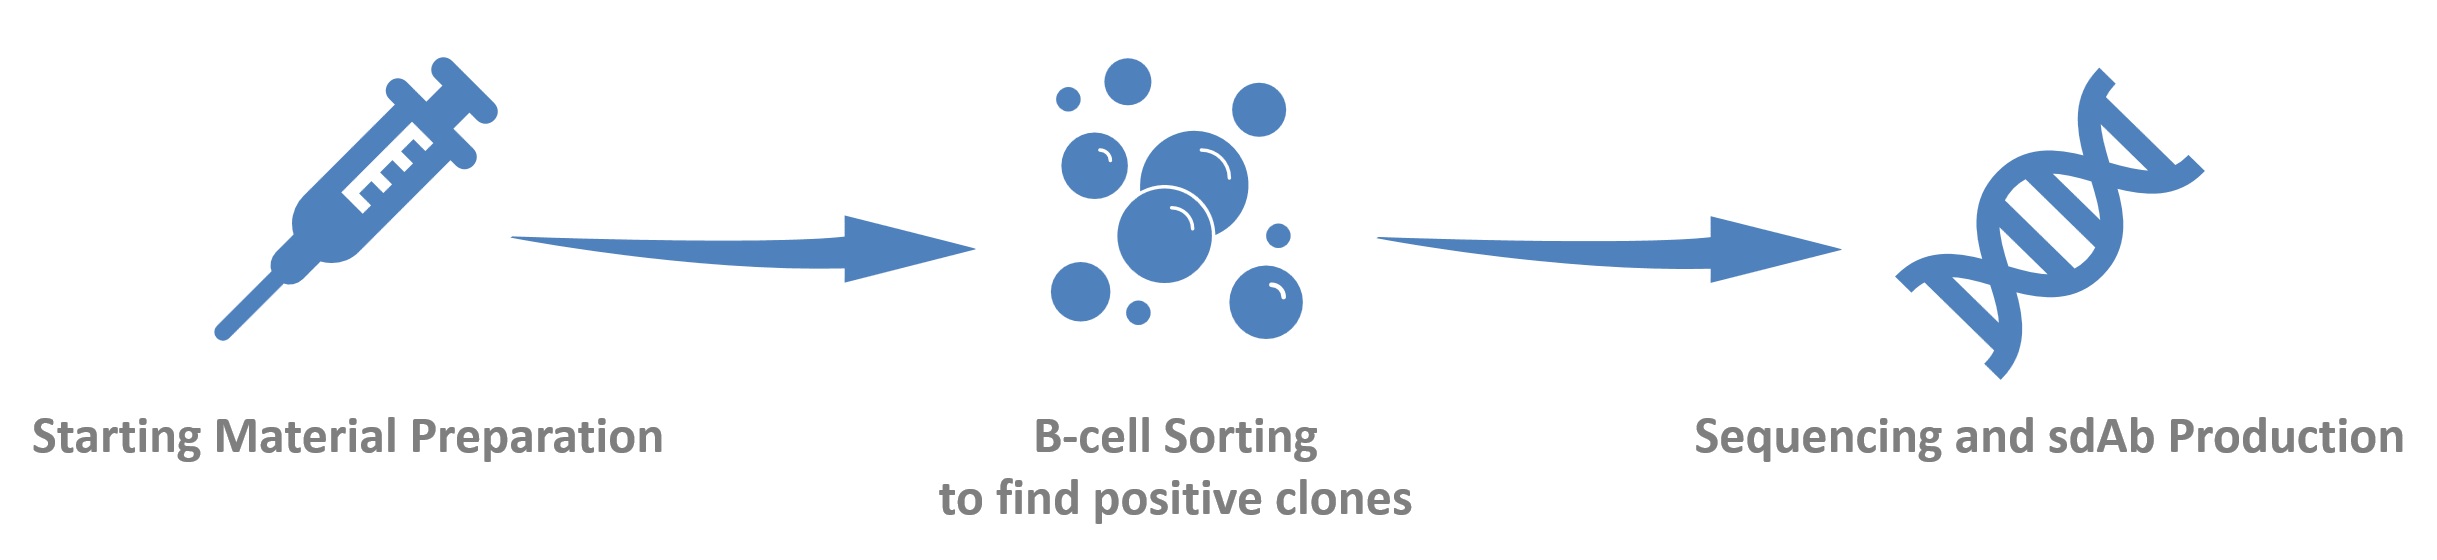 B-cell-sorting-based sdAb discovery.